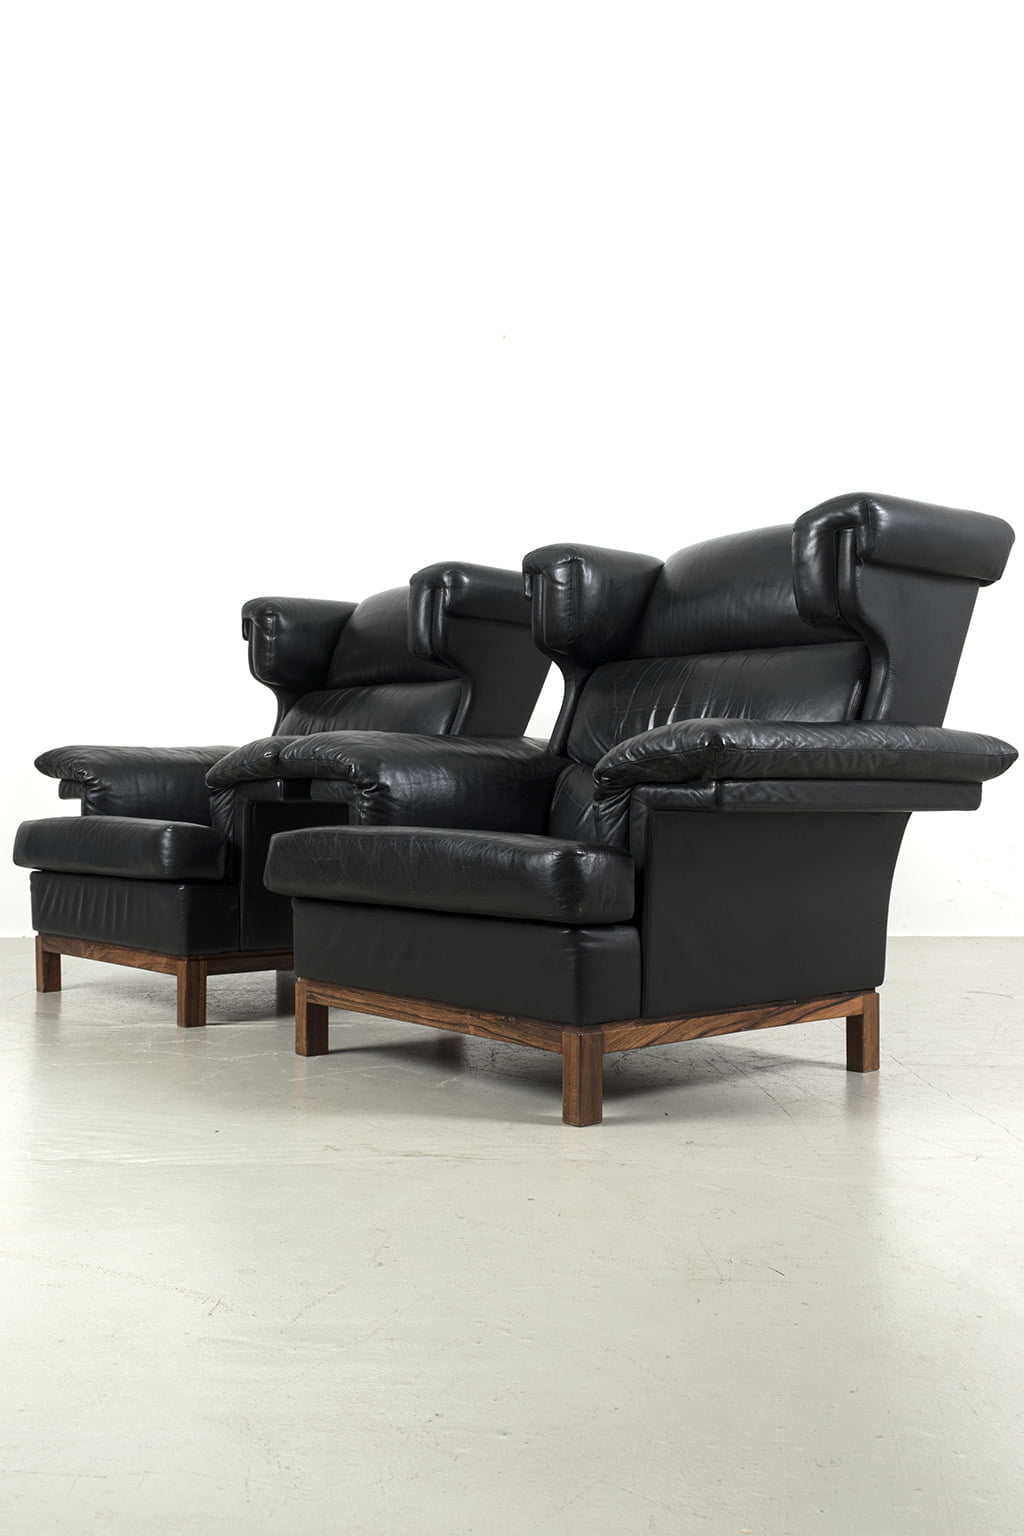 Large wingback chair set